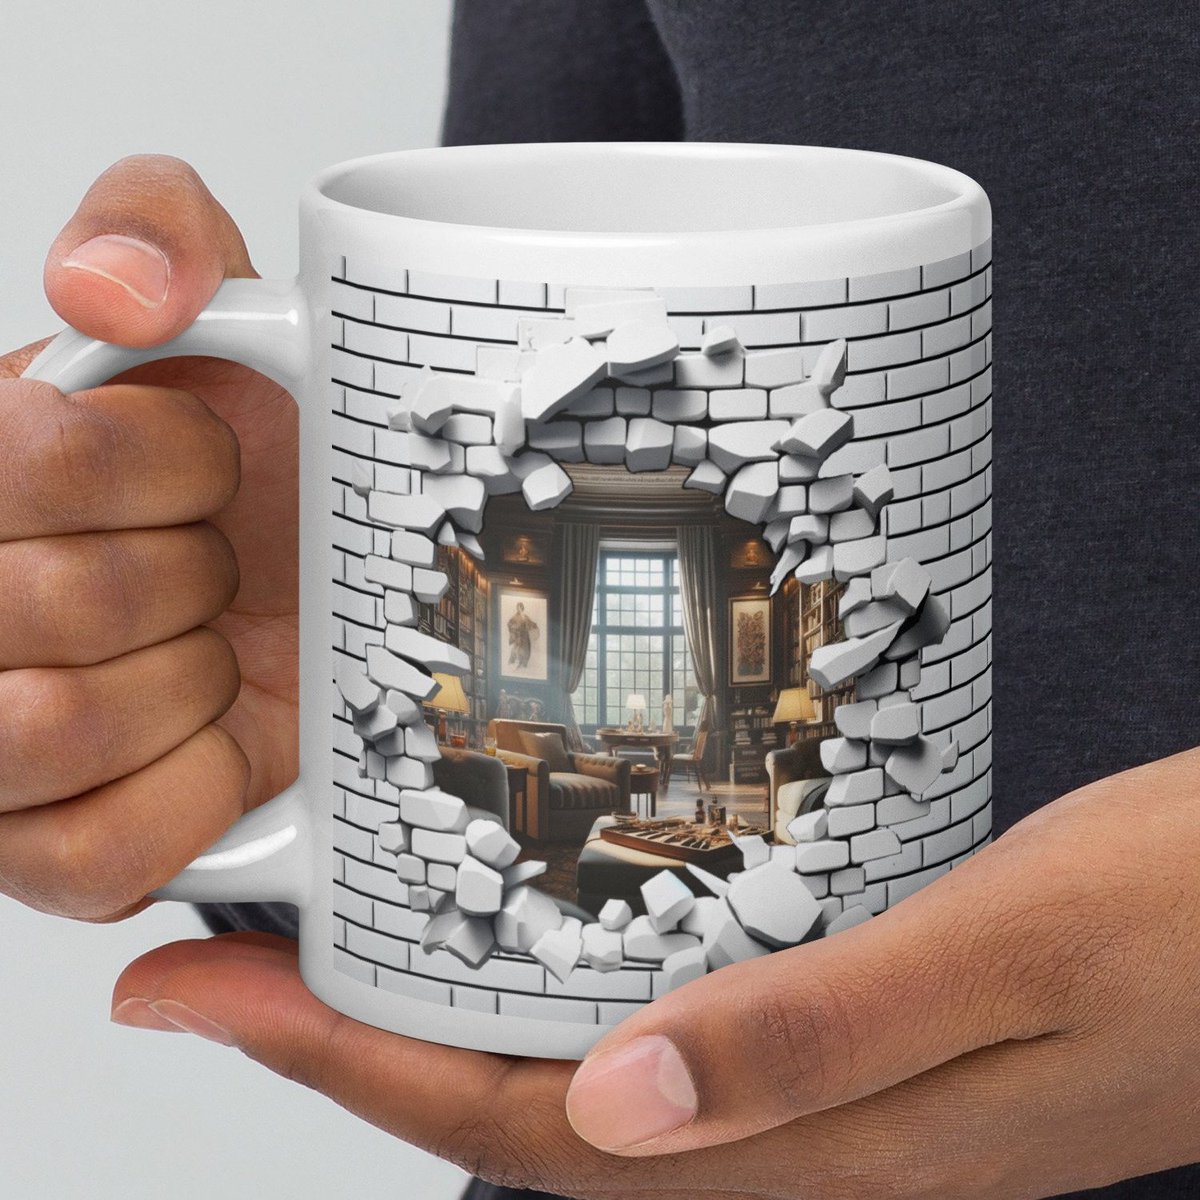 Start your day with elegance. Our Elegant Den Mug, featuring a luxurious 3D den design, brings sophistication to your morning brew. ☕🏡 #ElegantMug #LuxuriousCoffee #StylishMorning
shhcreations.com/products/elega…